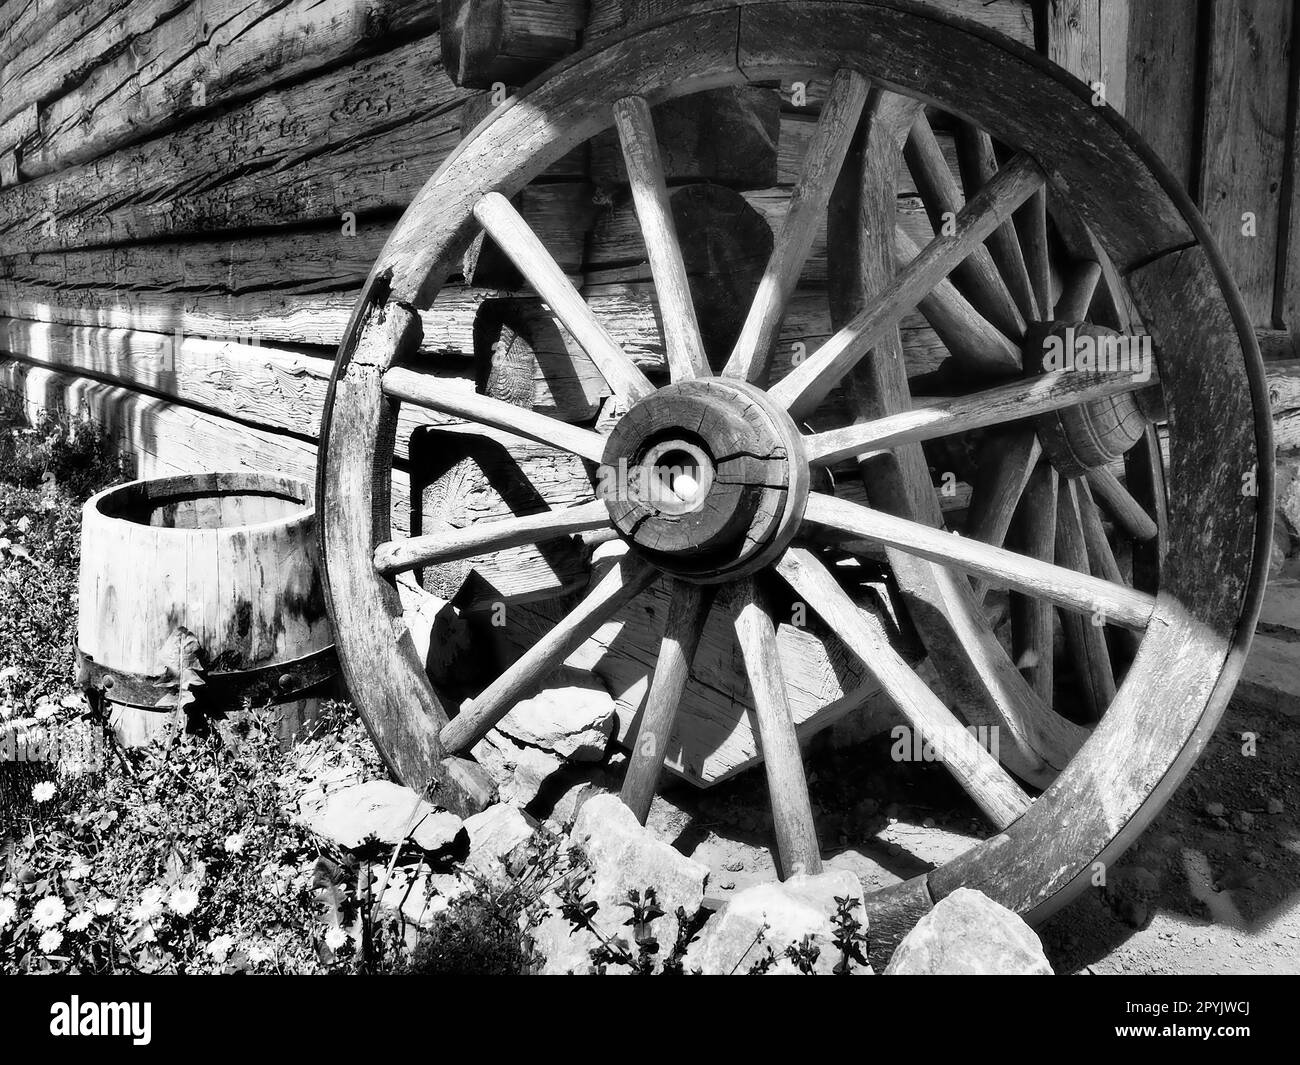 Wooden wheel from a cart. Decorative wheels for decorating lawns, exteriors and rustic interiors. Round homemade wheel against the wall Retro or vintage style. Life in the countryside. Black and white Stock Photo